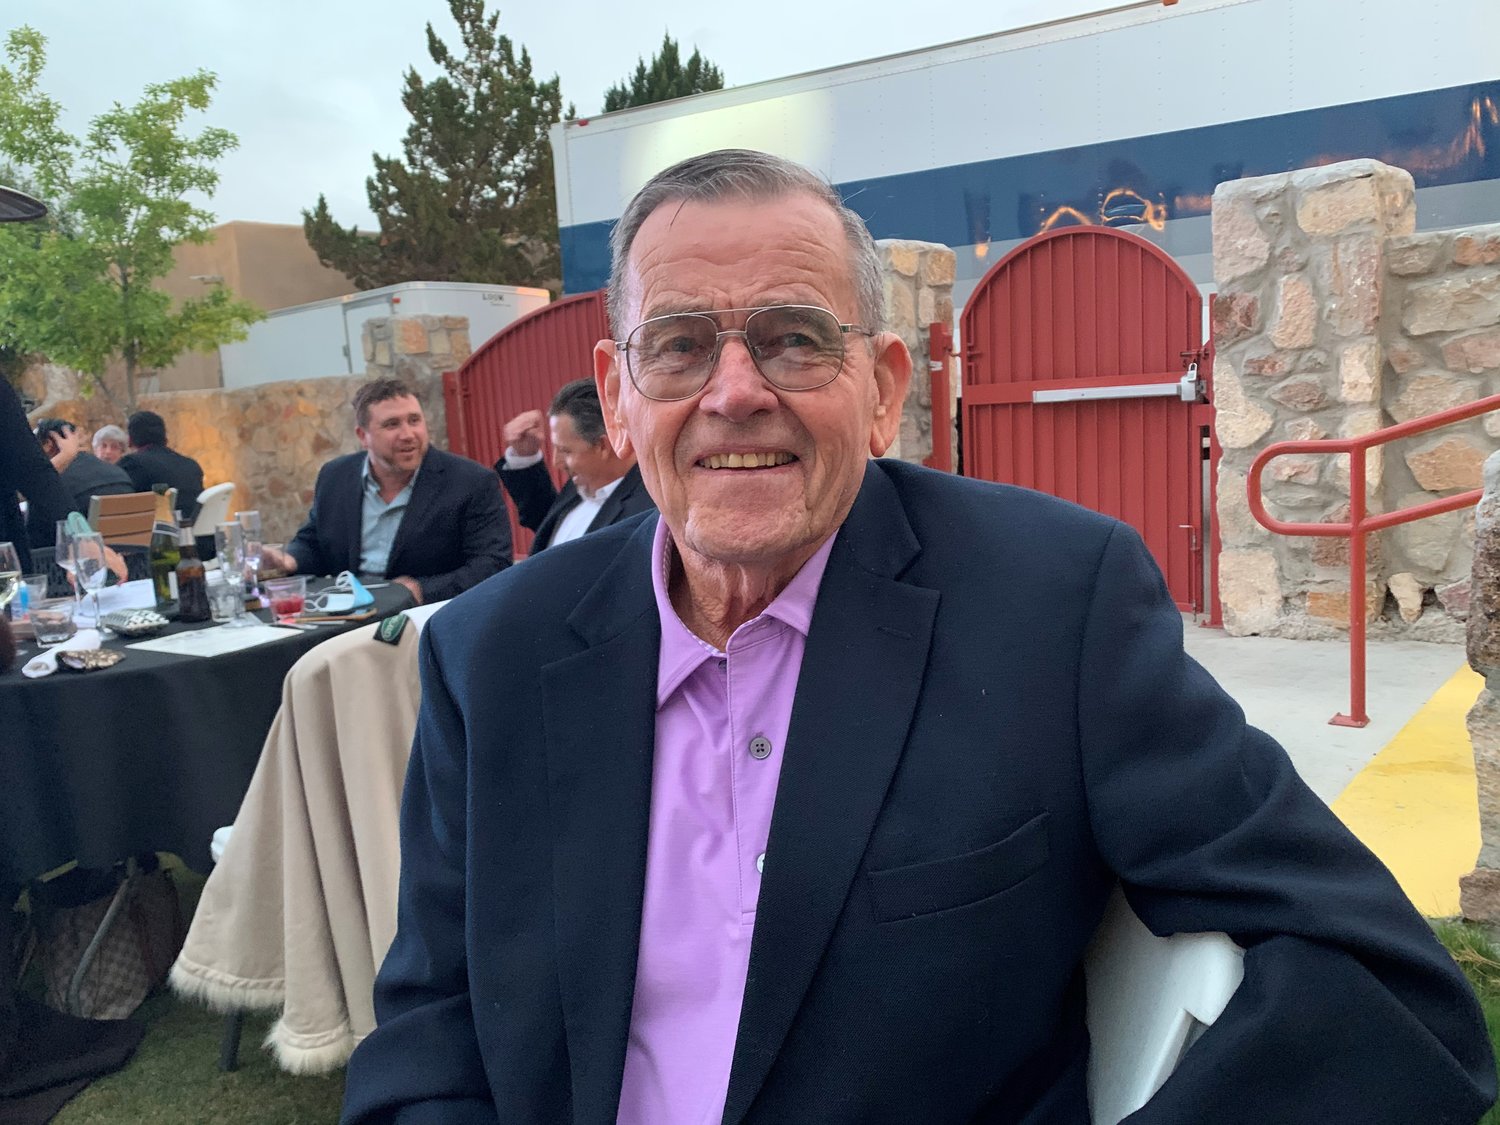 Herb Wimberly, a leader in the area golf scene from the 1960s to the 90s attends the “Walking with Herb” premier. Wimberly was the inspiration for the main character in the movie.